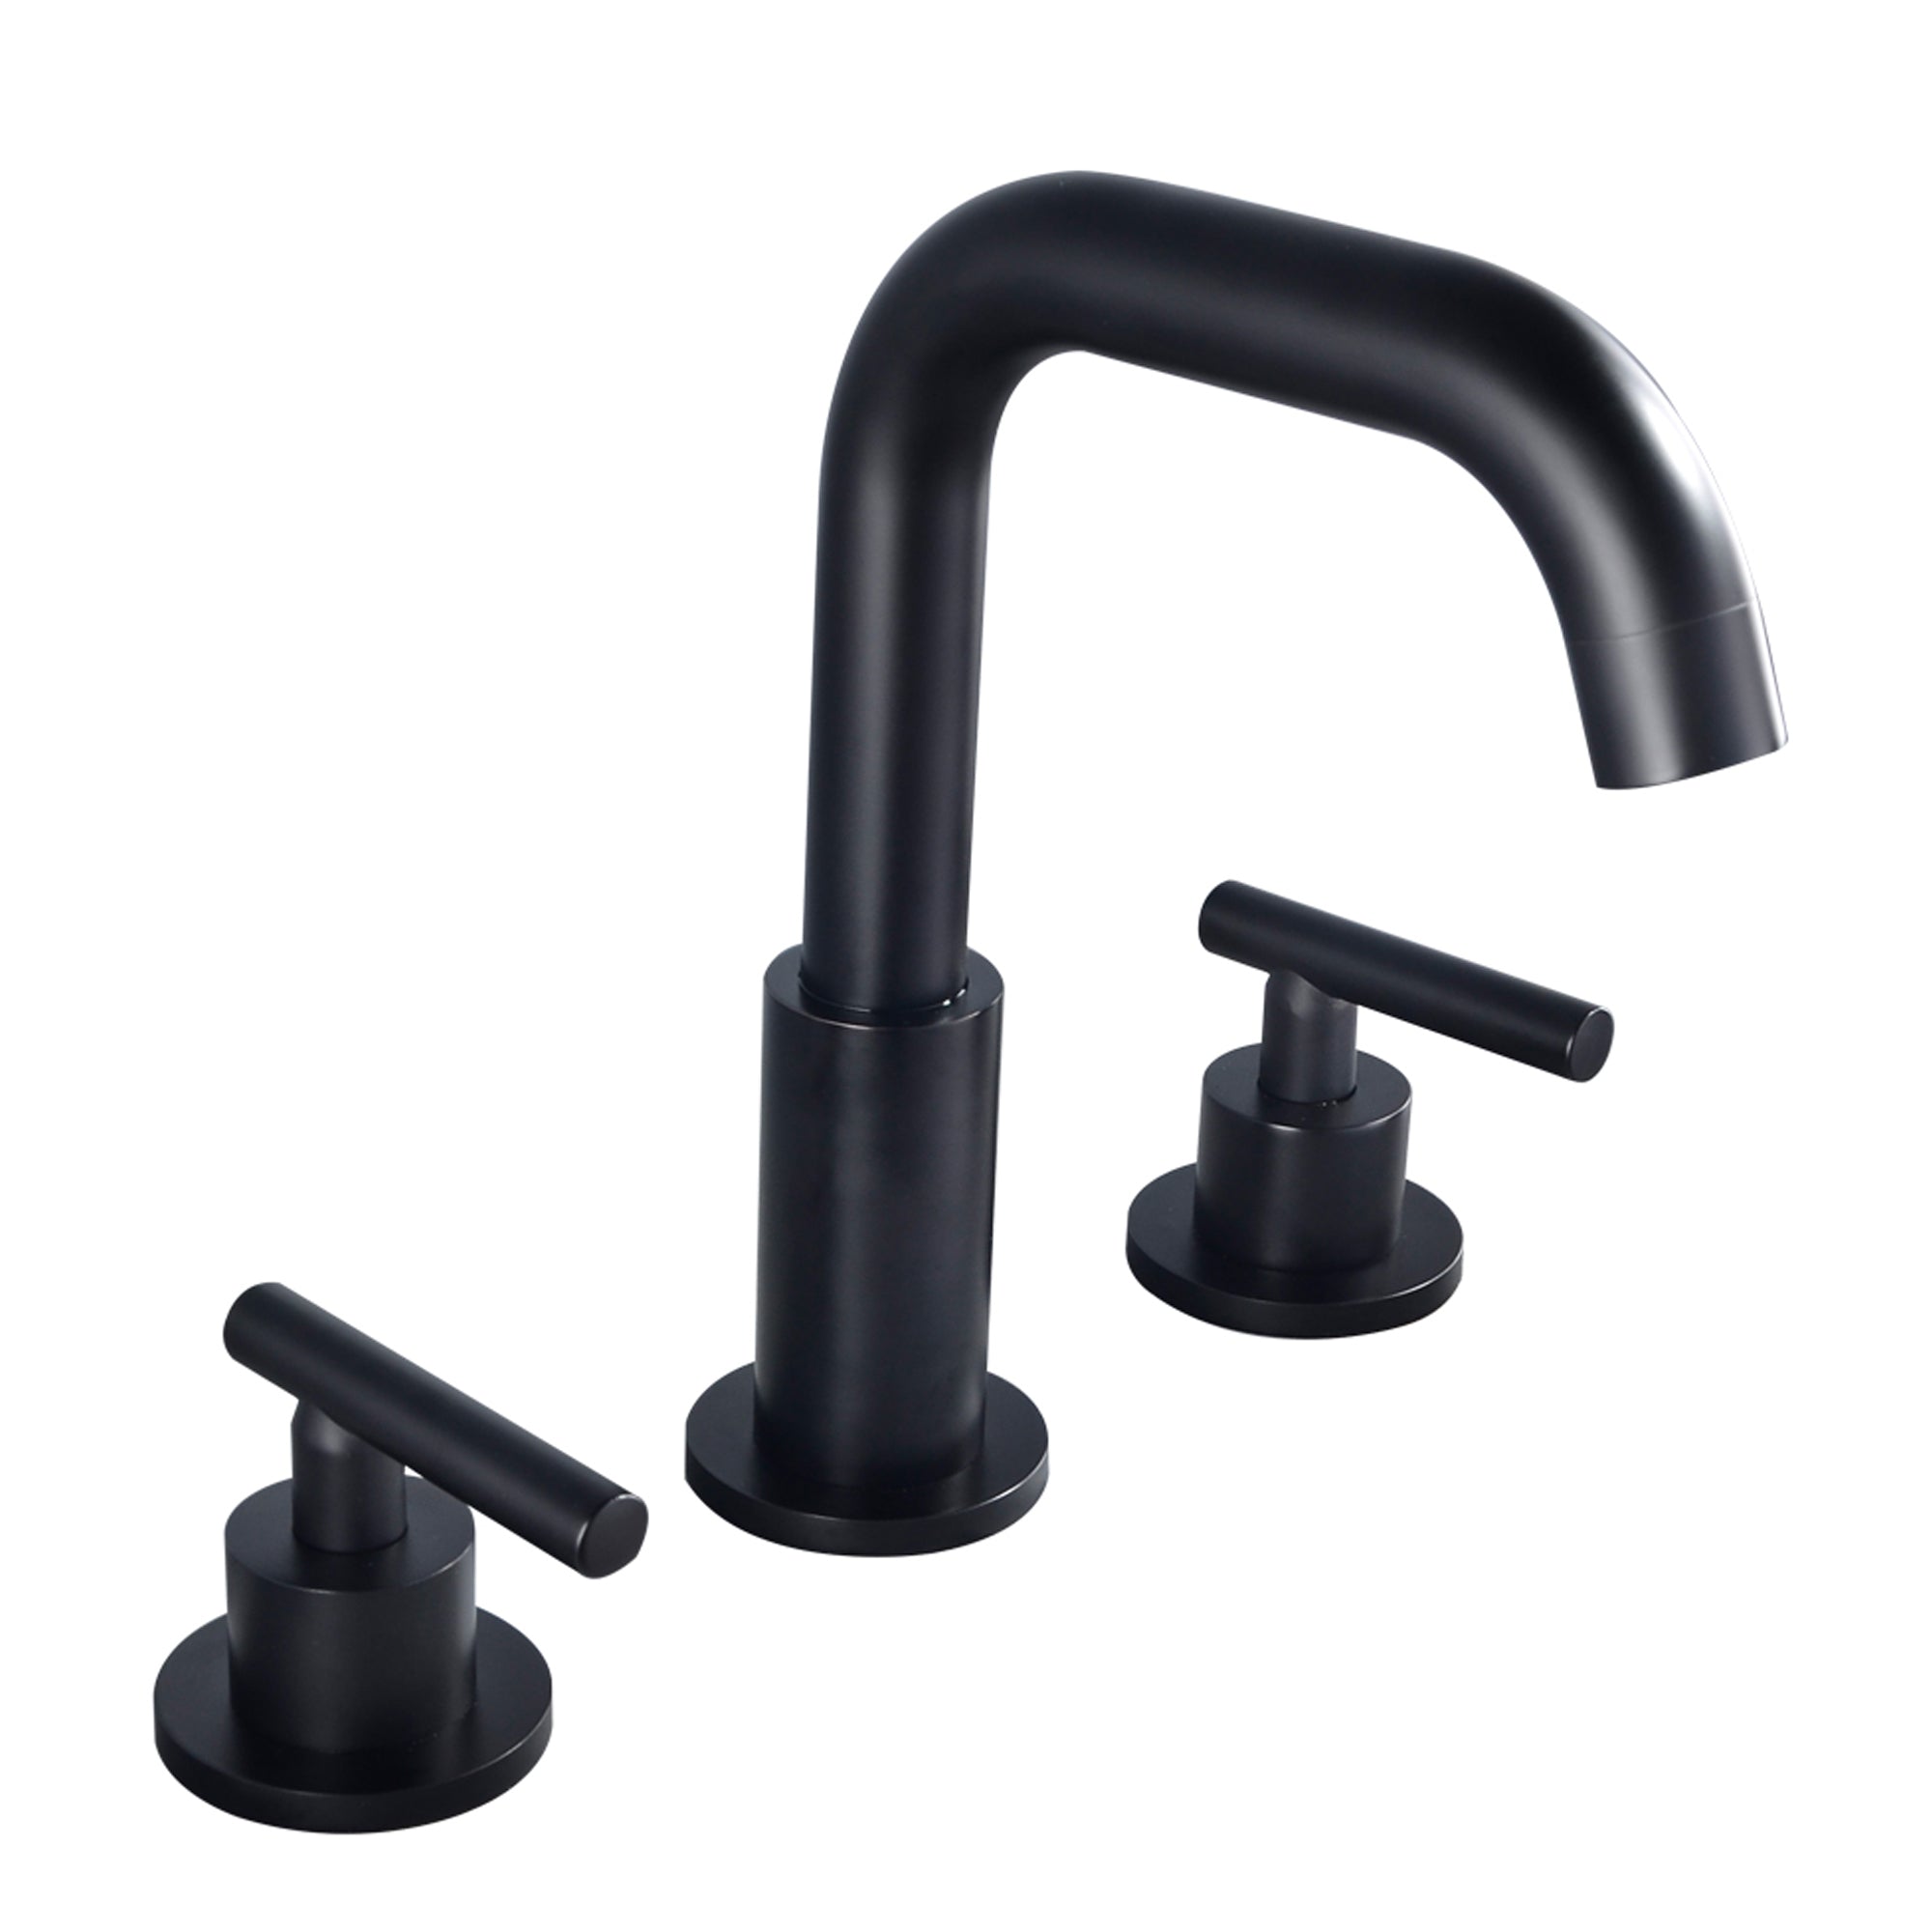 Boyel Living 8 in. Widespread 2-Handle Mid-Arc Bathroom Faucet with Valve and cUPC Water Supply Lines in Matte Black-Boyel Living